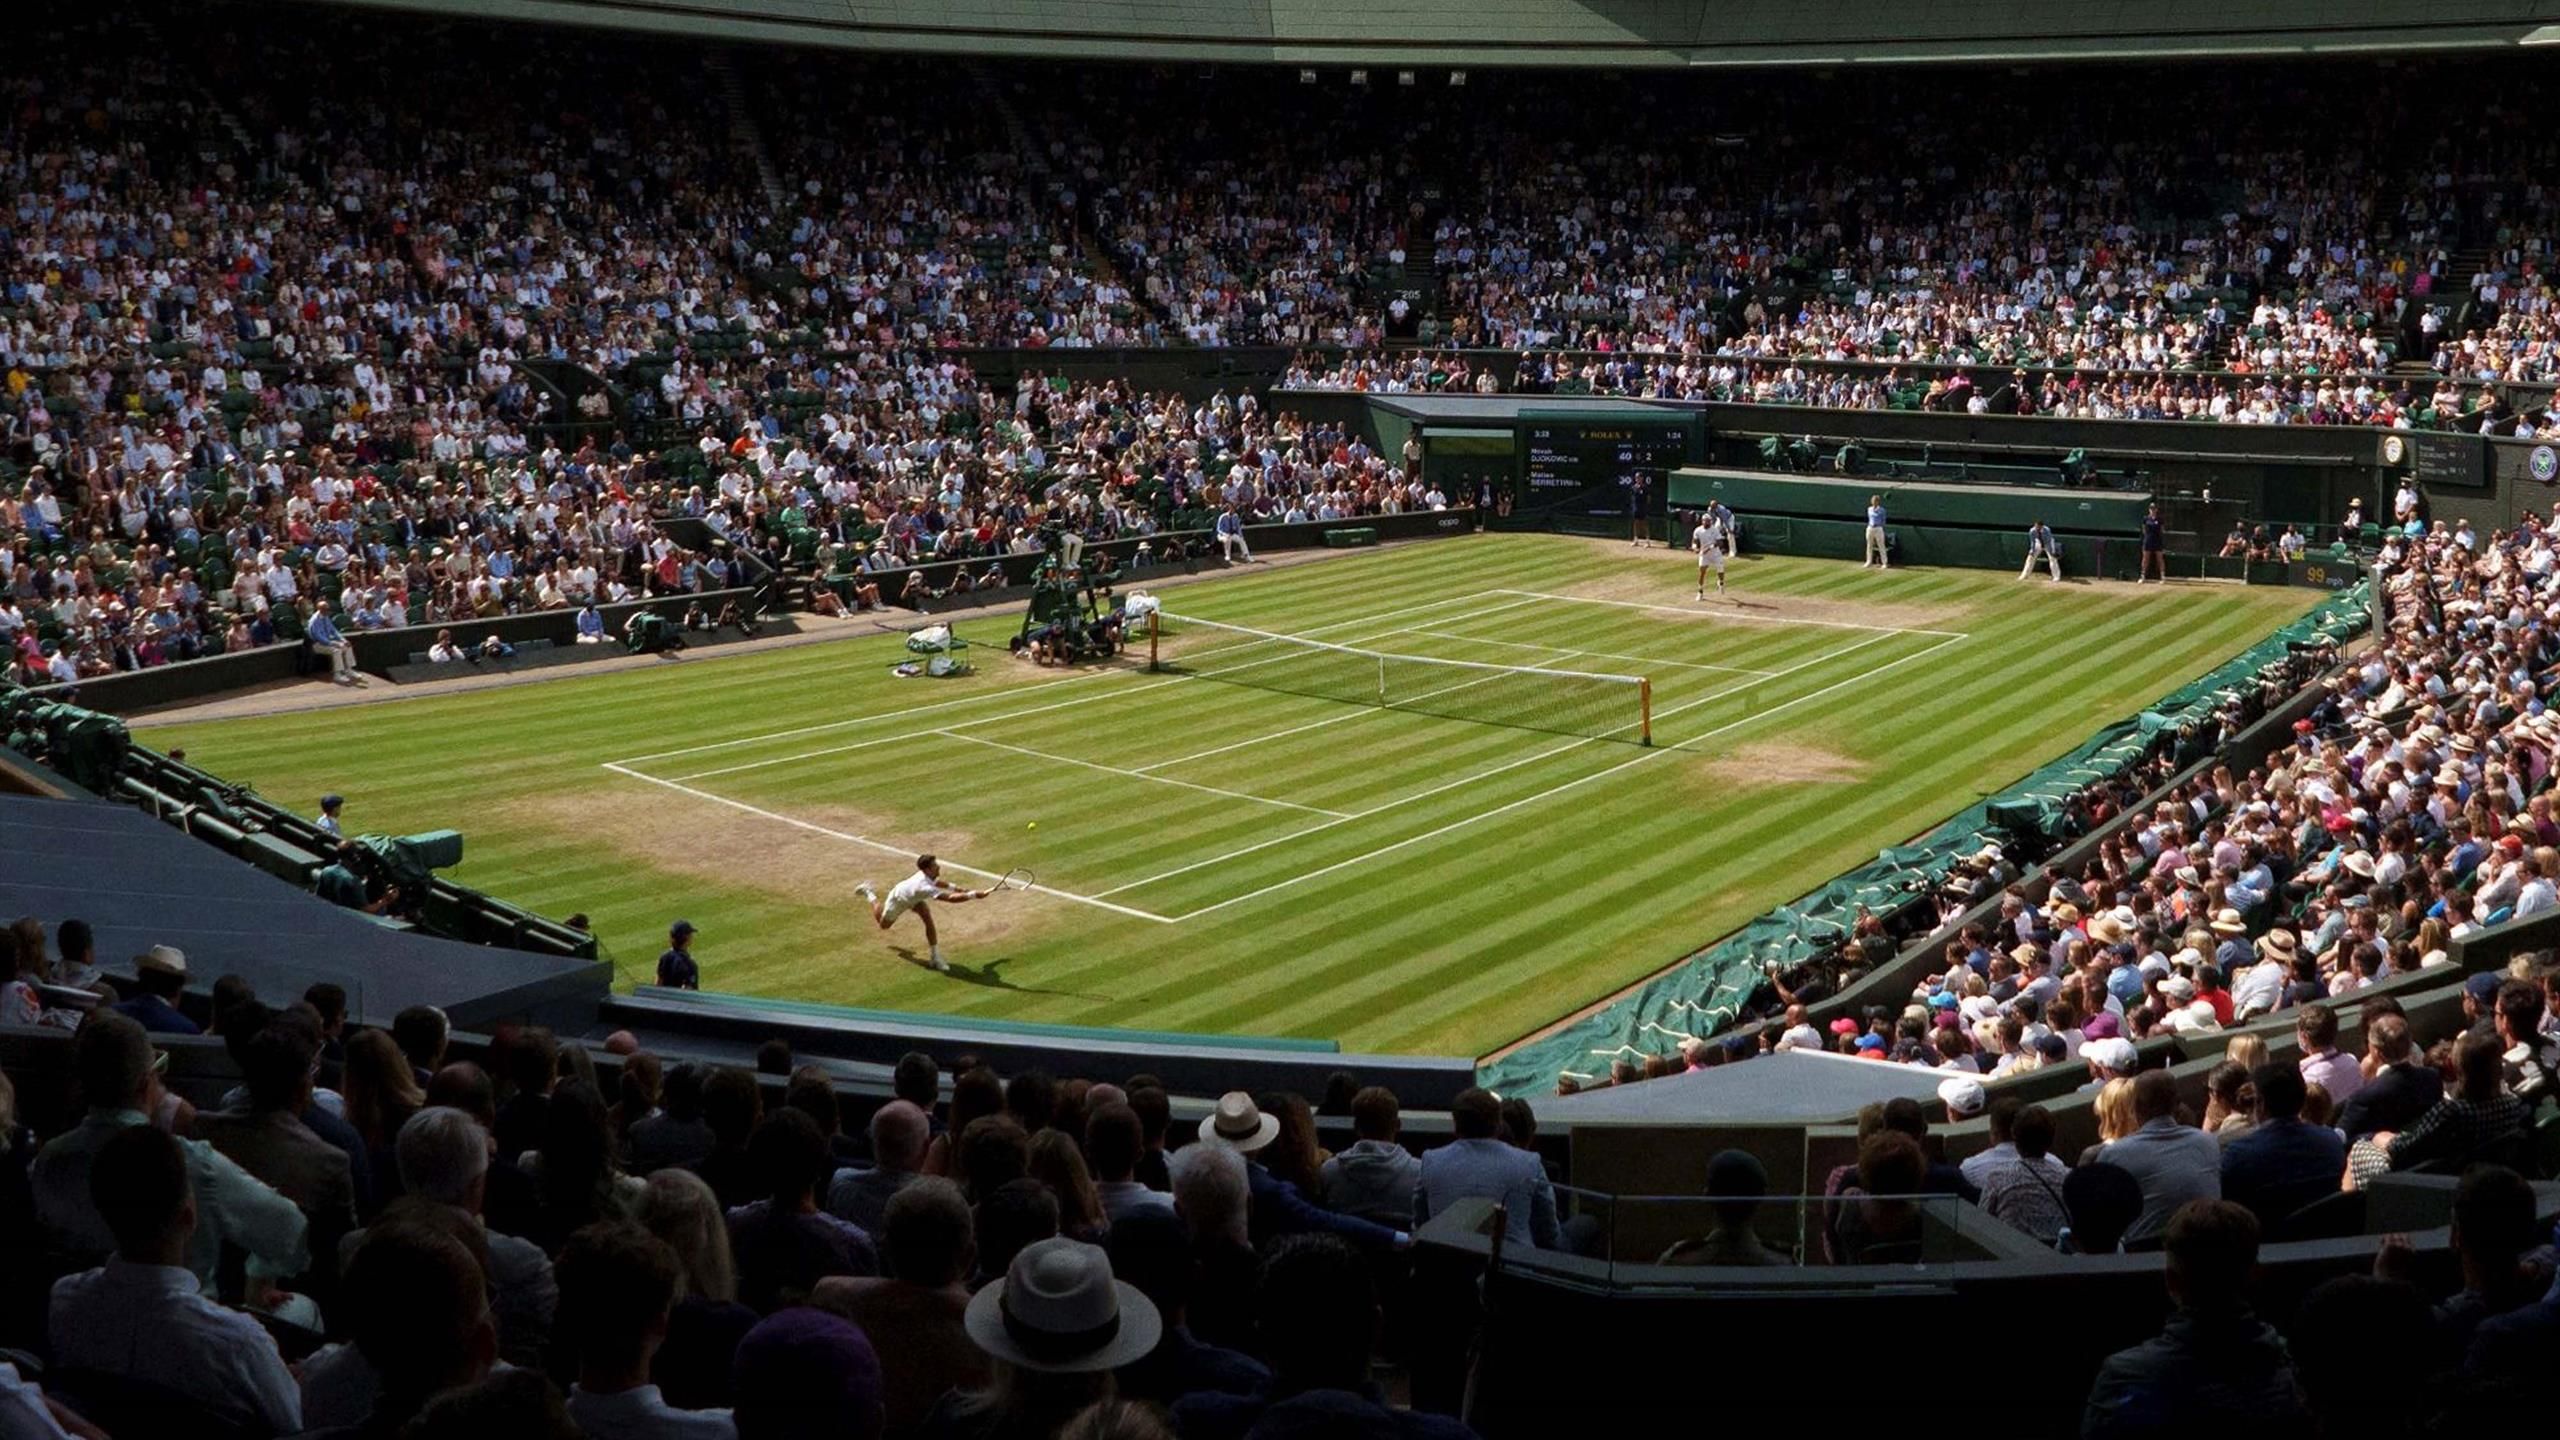 Wimbledon stands by player ban and hits out at disproportionate move to remove ranking points